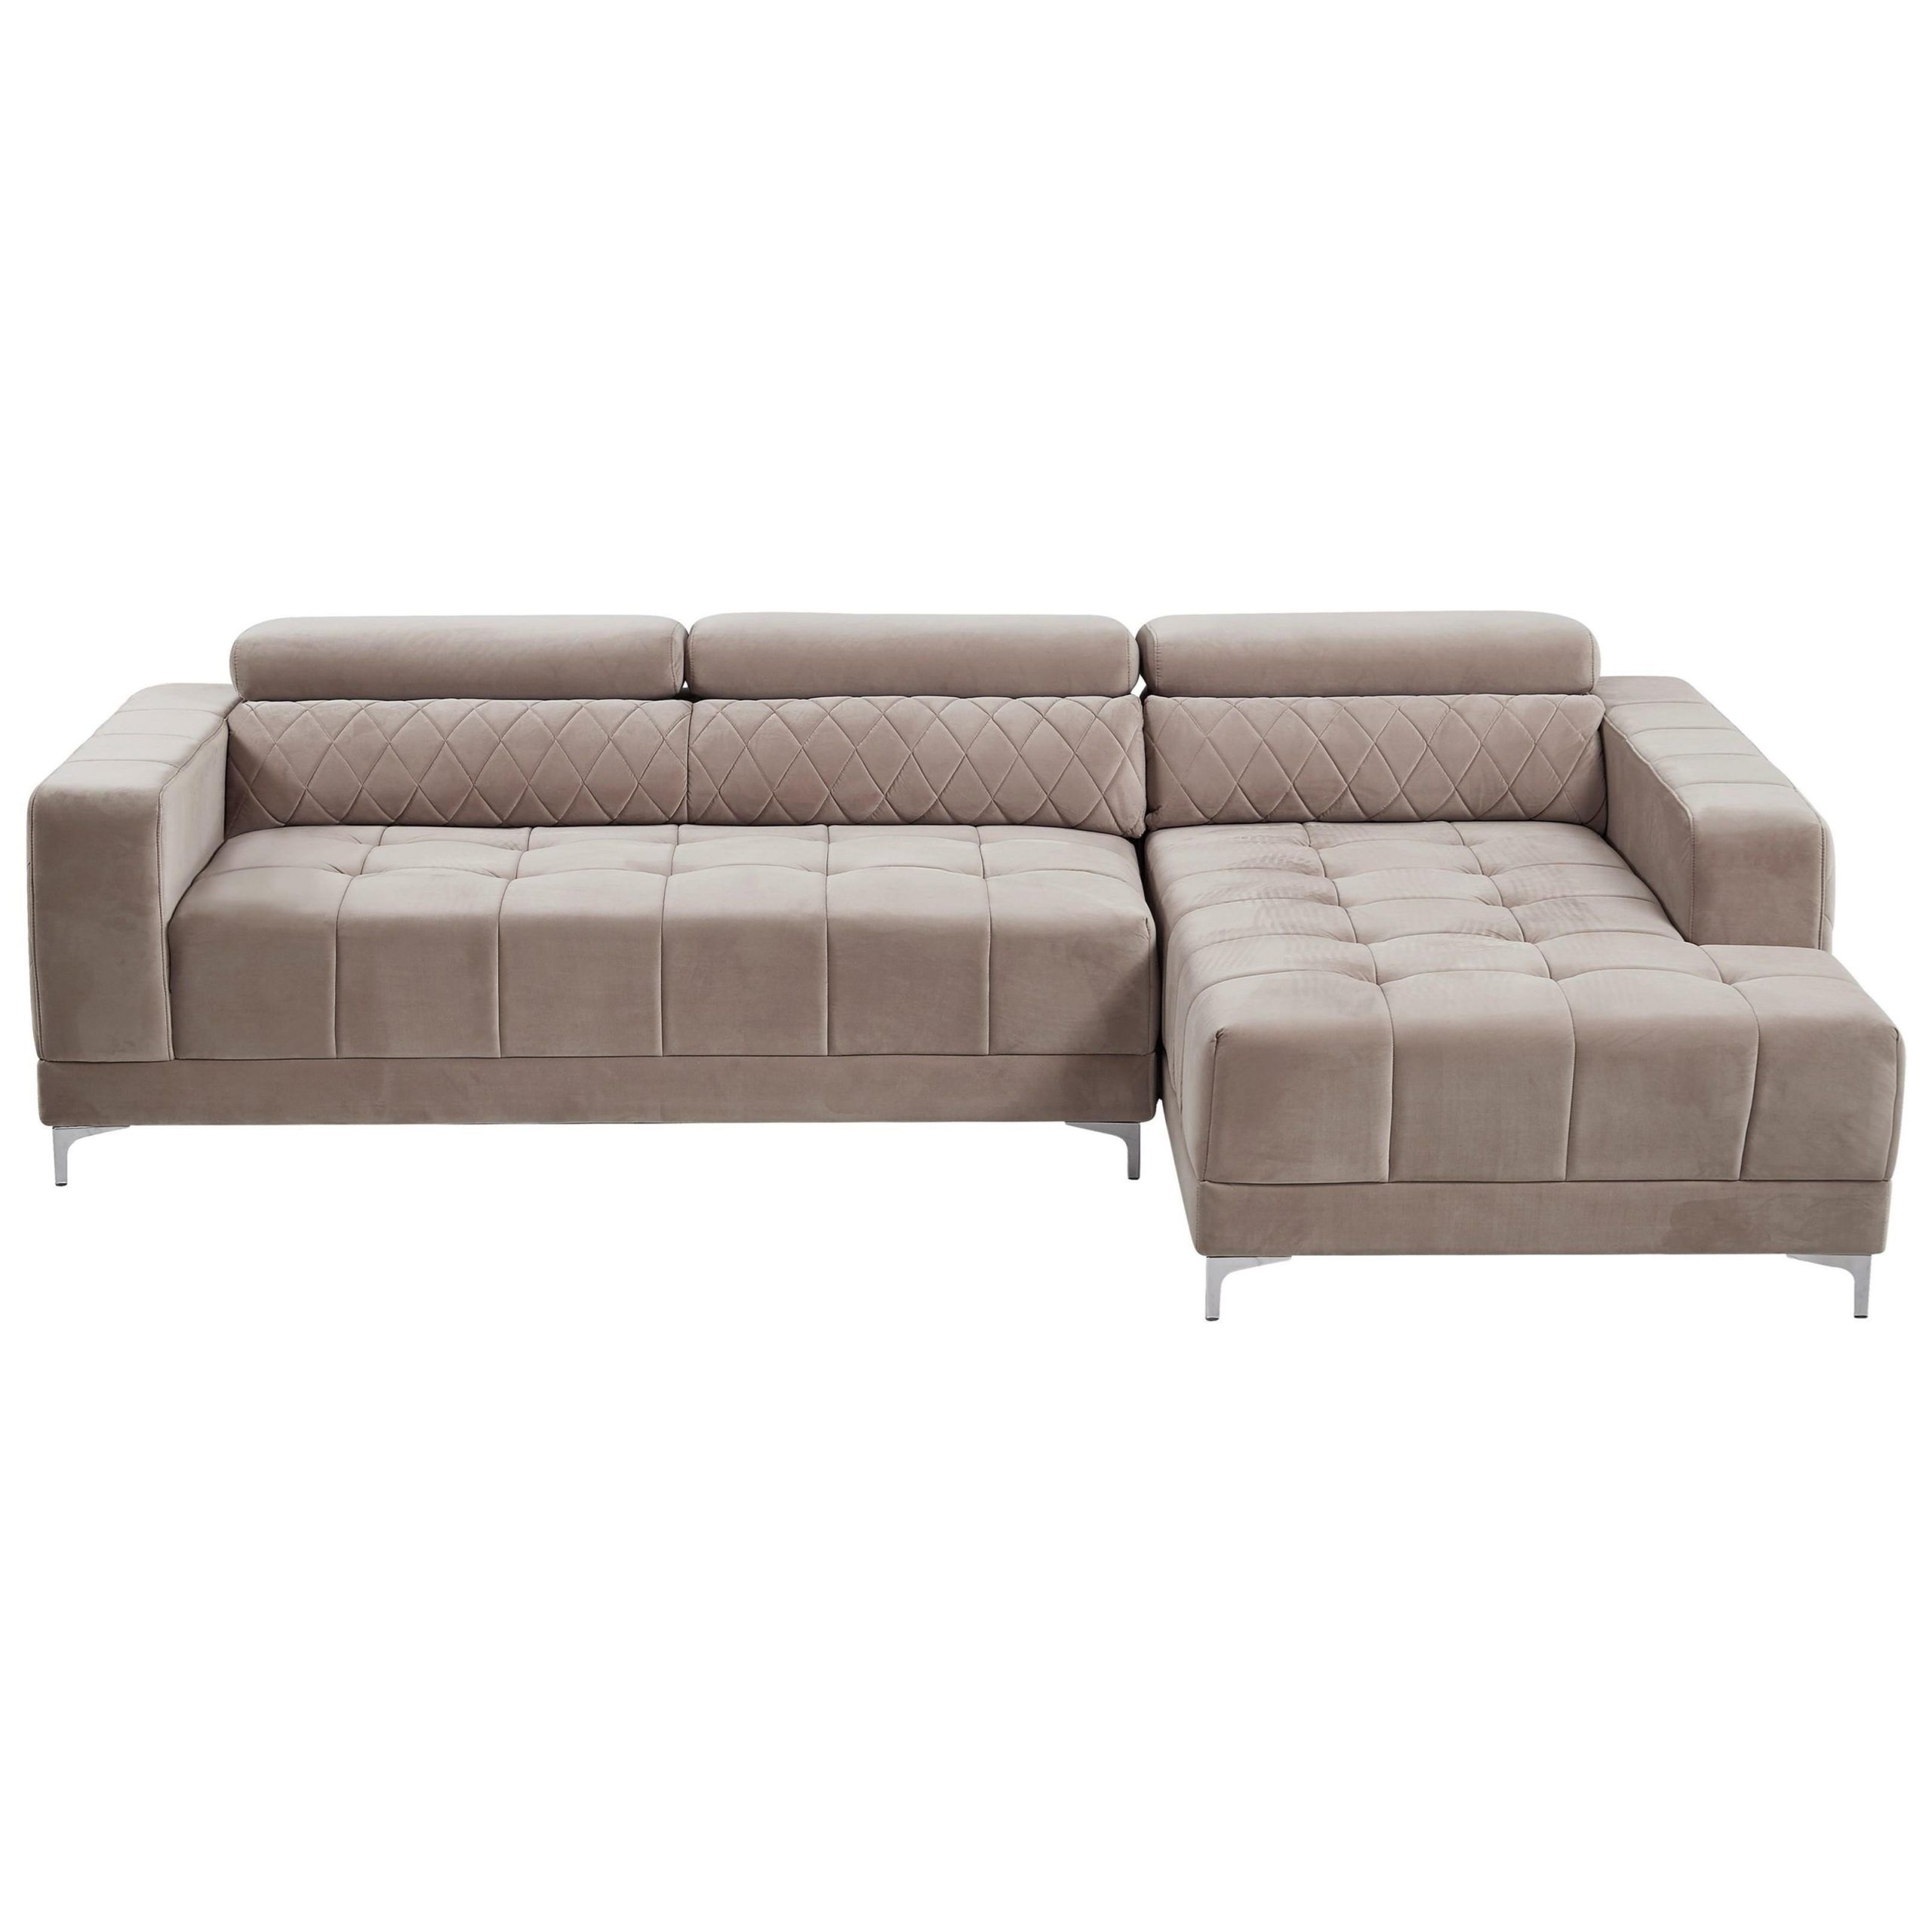 Global Furniture U0037 Contemporary 2 Piece Sectional With Intended For 2Pc Burland Contemporary Sectional Sofas Charcoal (View 6 of 15)